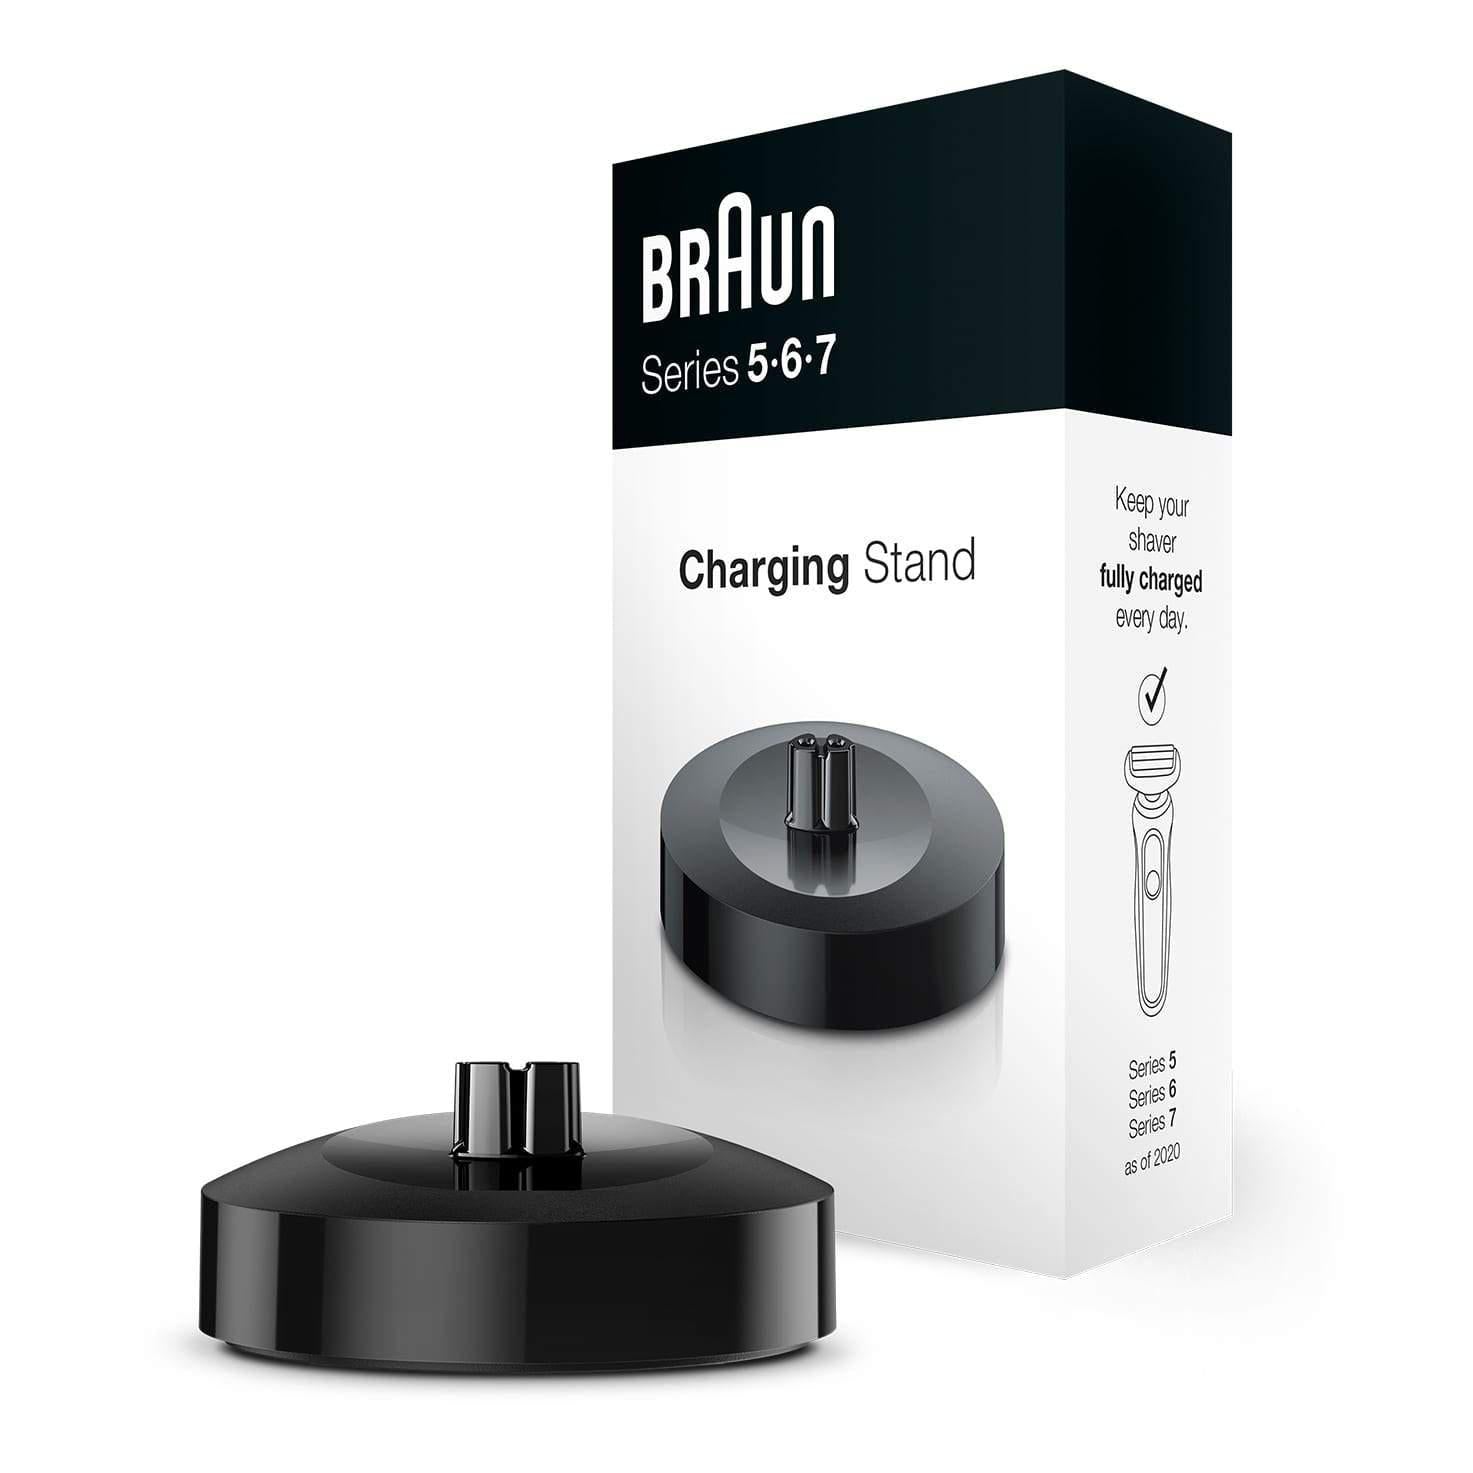 Braun Charging Stand for New 2020 Series 5, 6 and 7 Electric Shavers - Healthxpress.ie